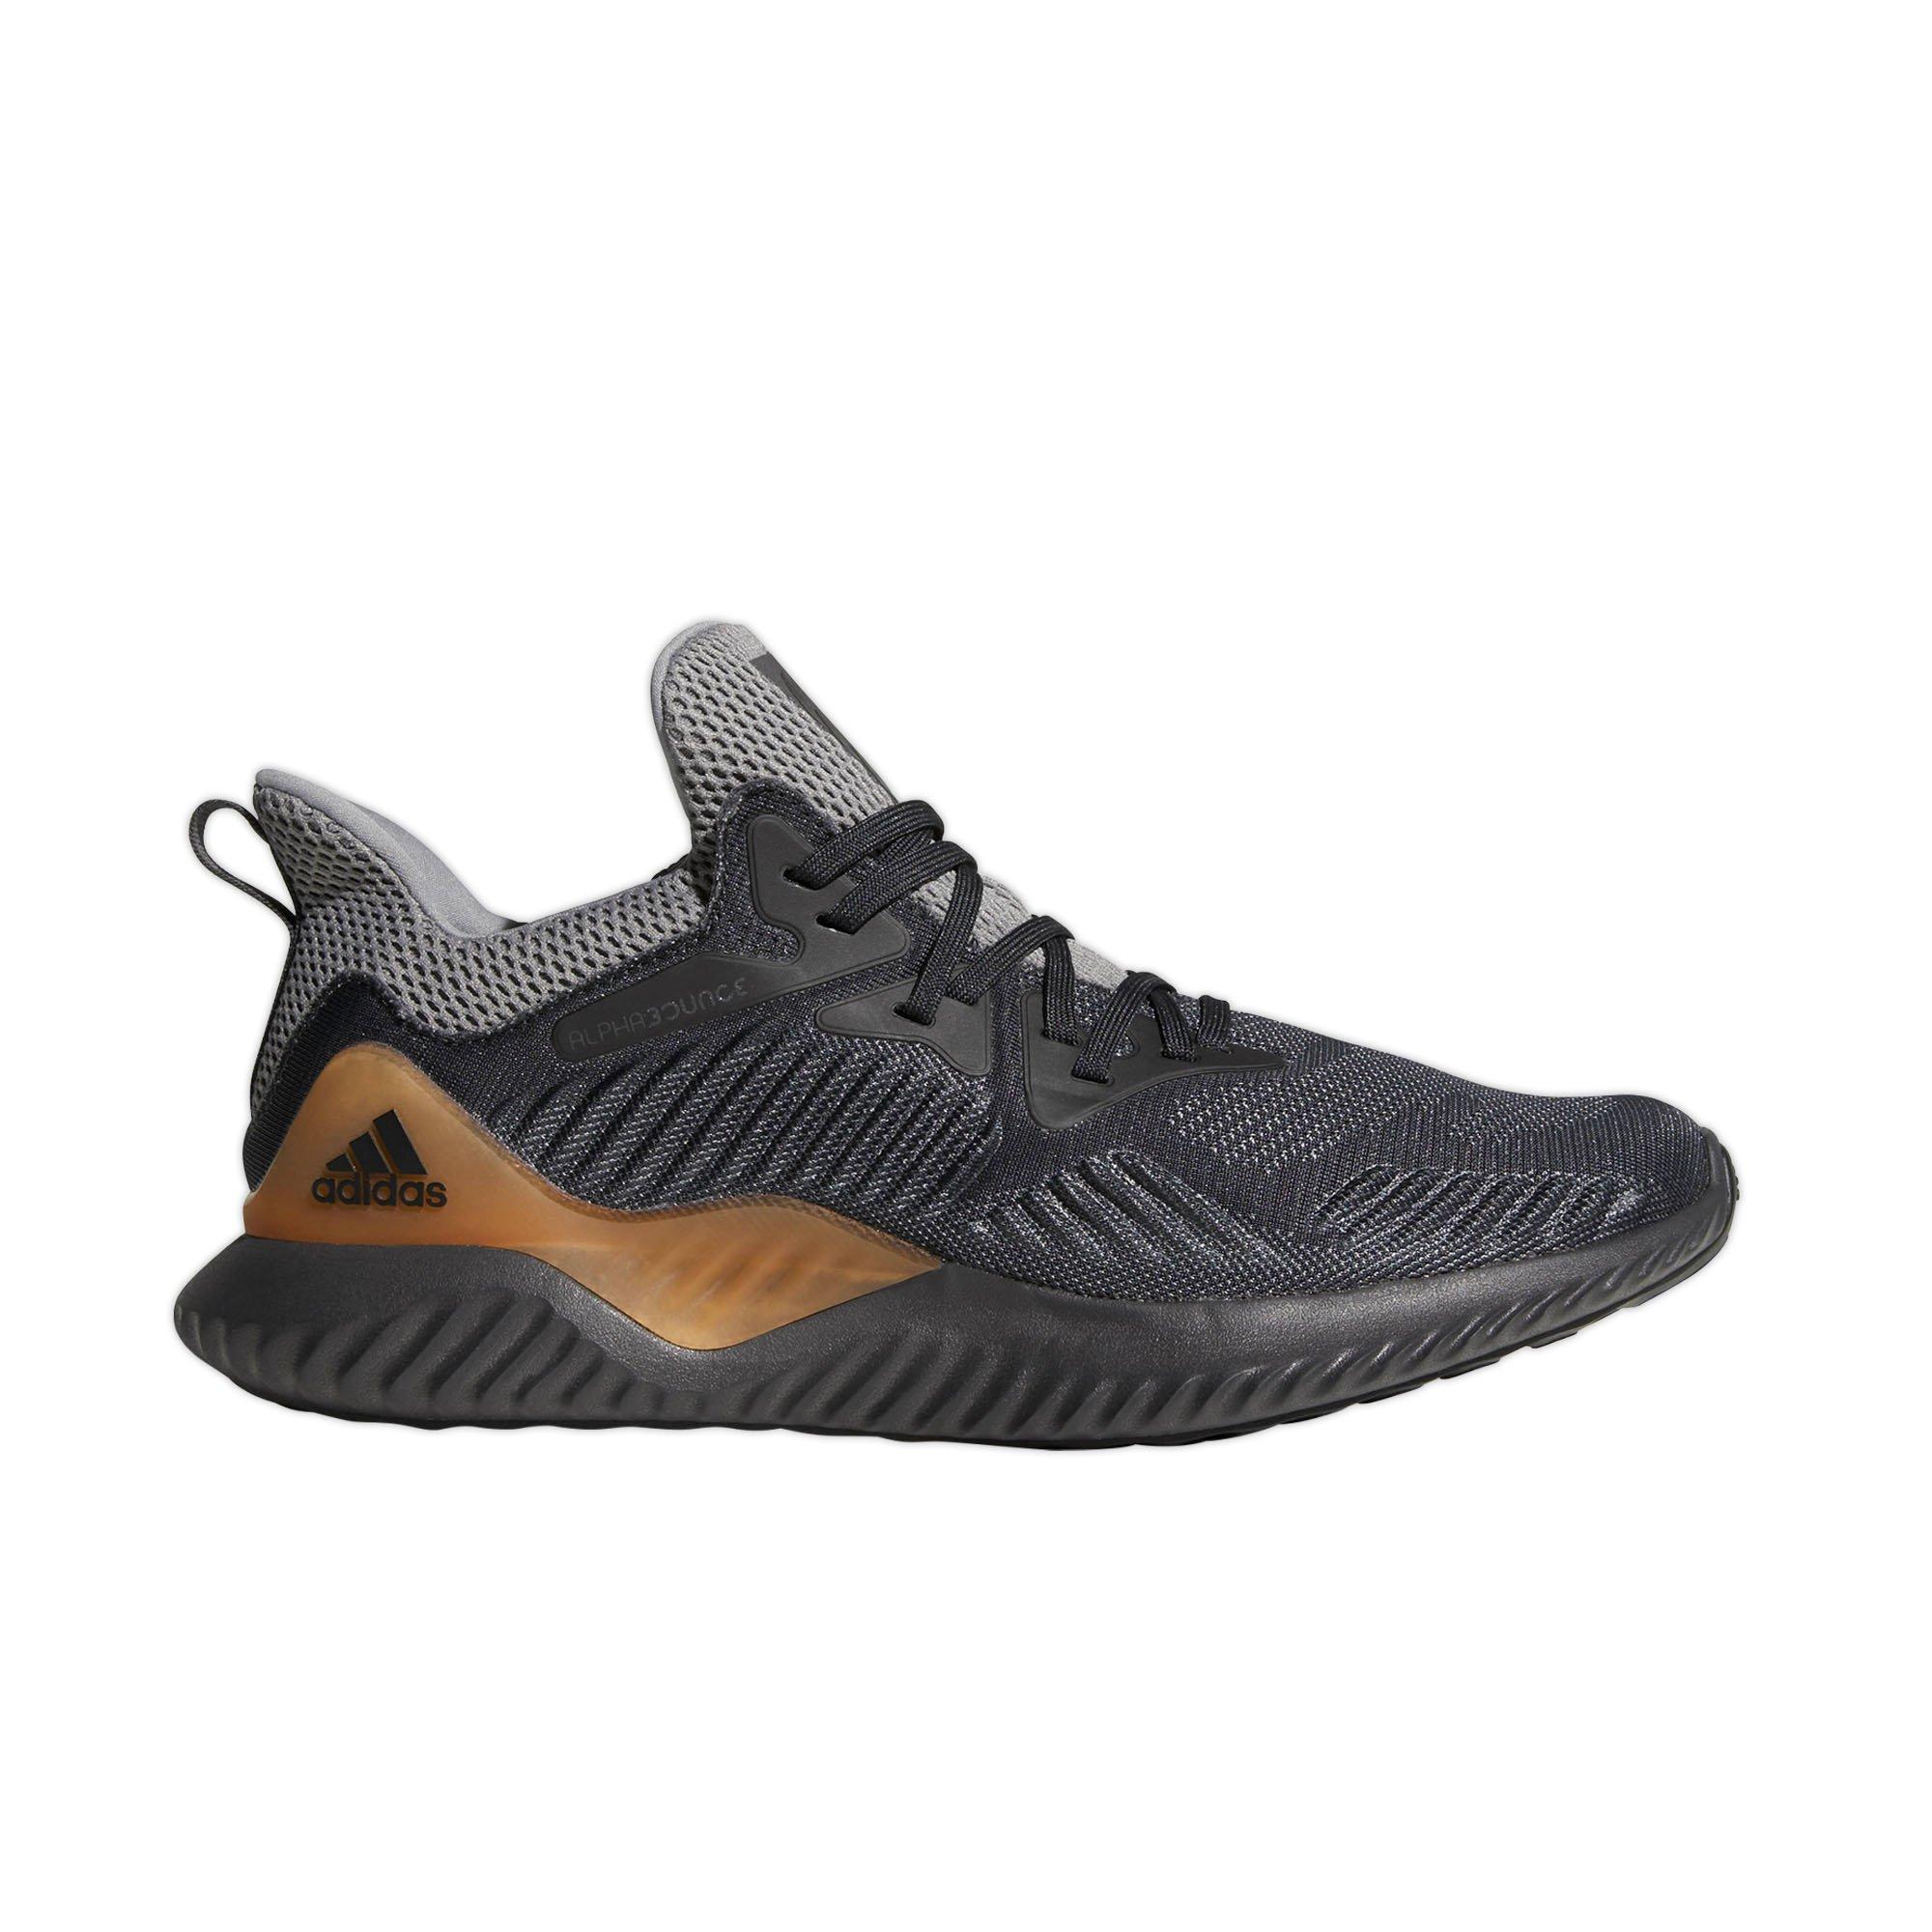 Adidas Alphabounce Grey/Carbon/Solid 